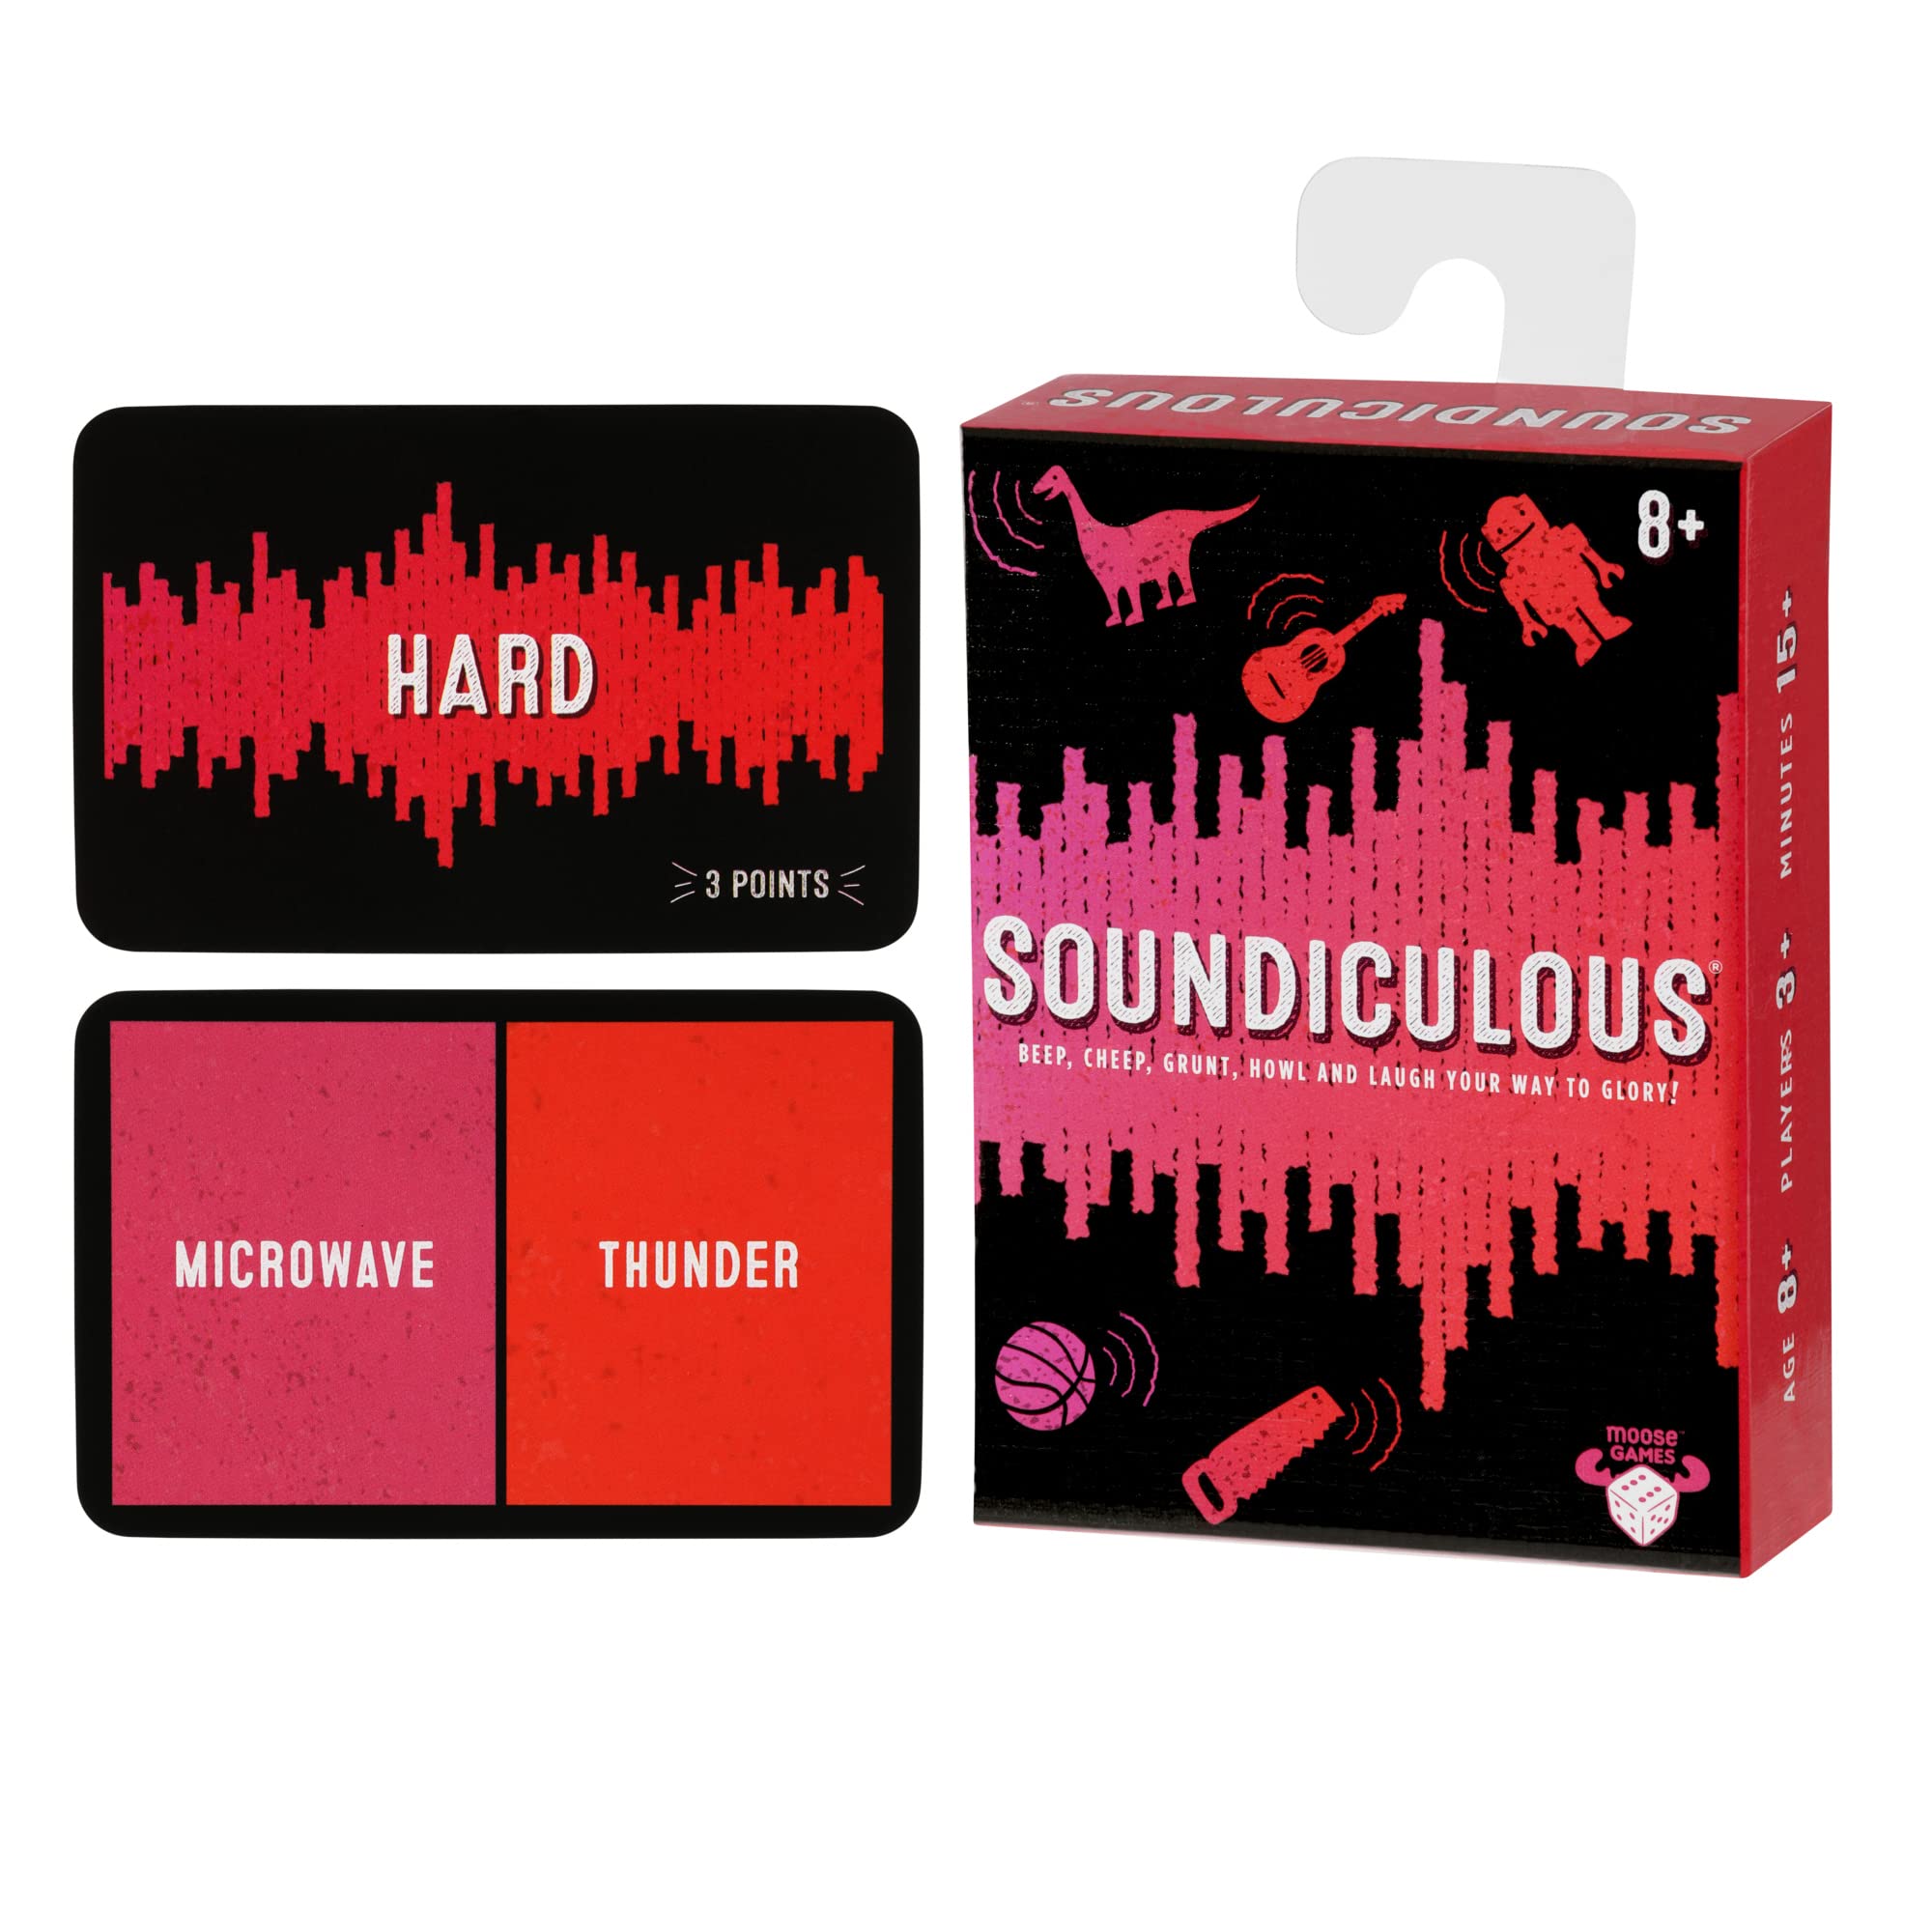 Soundiculous - Moose Games: The Hilarious Pocketsize Party Game of Ridiculous Sounds That Gets The Whole Family Laughing